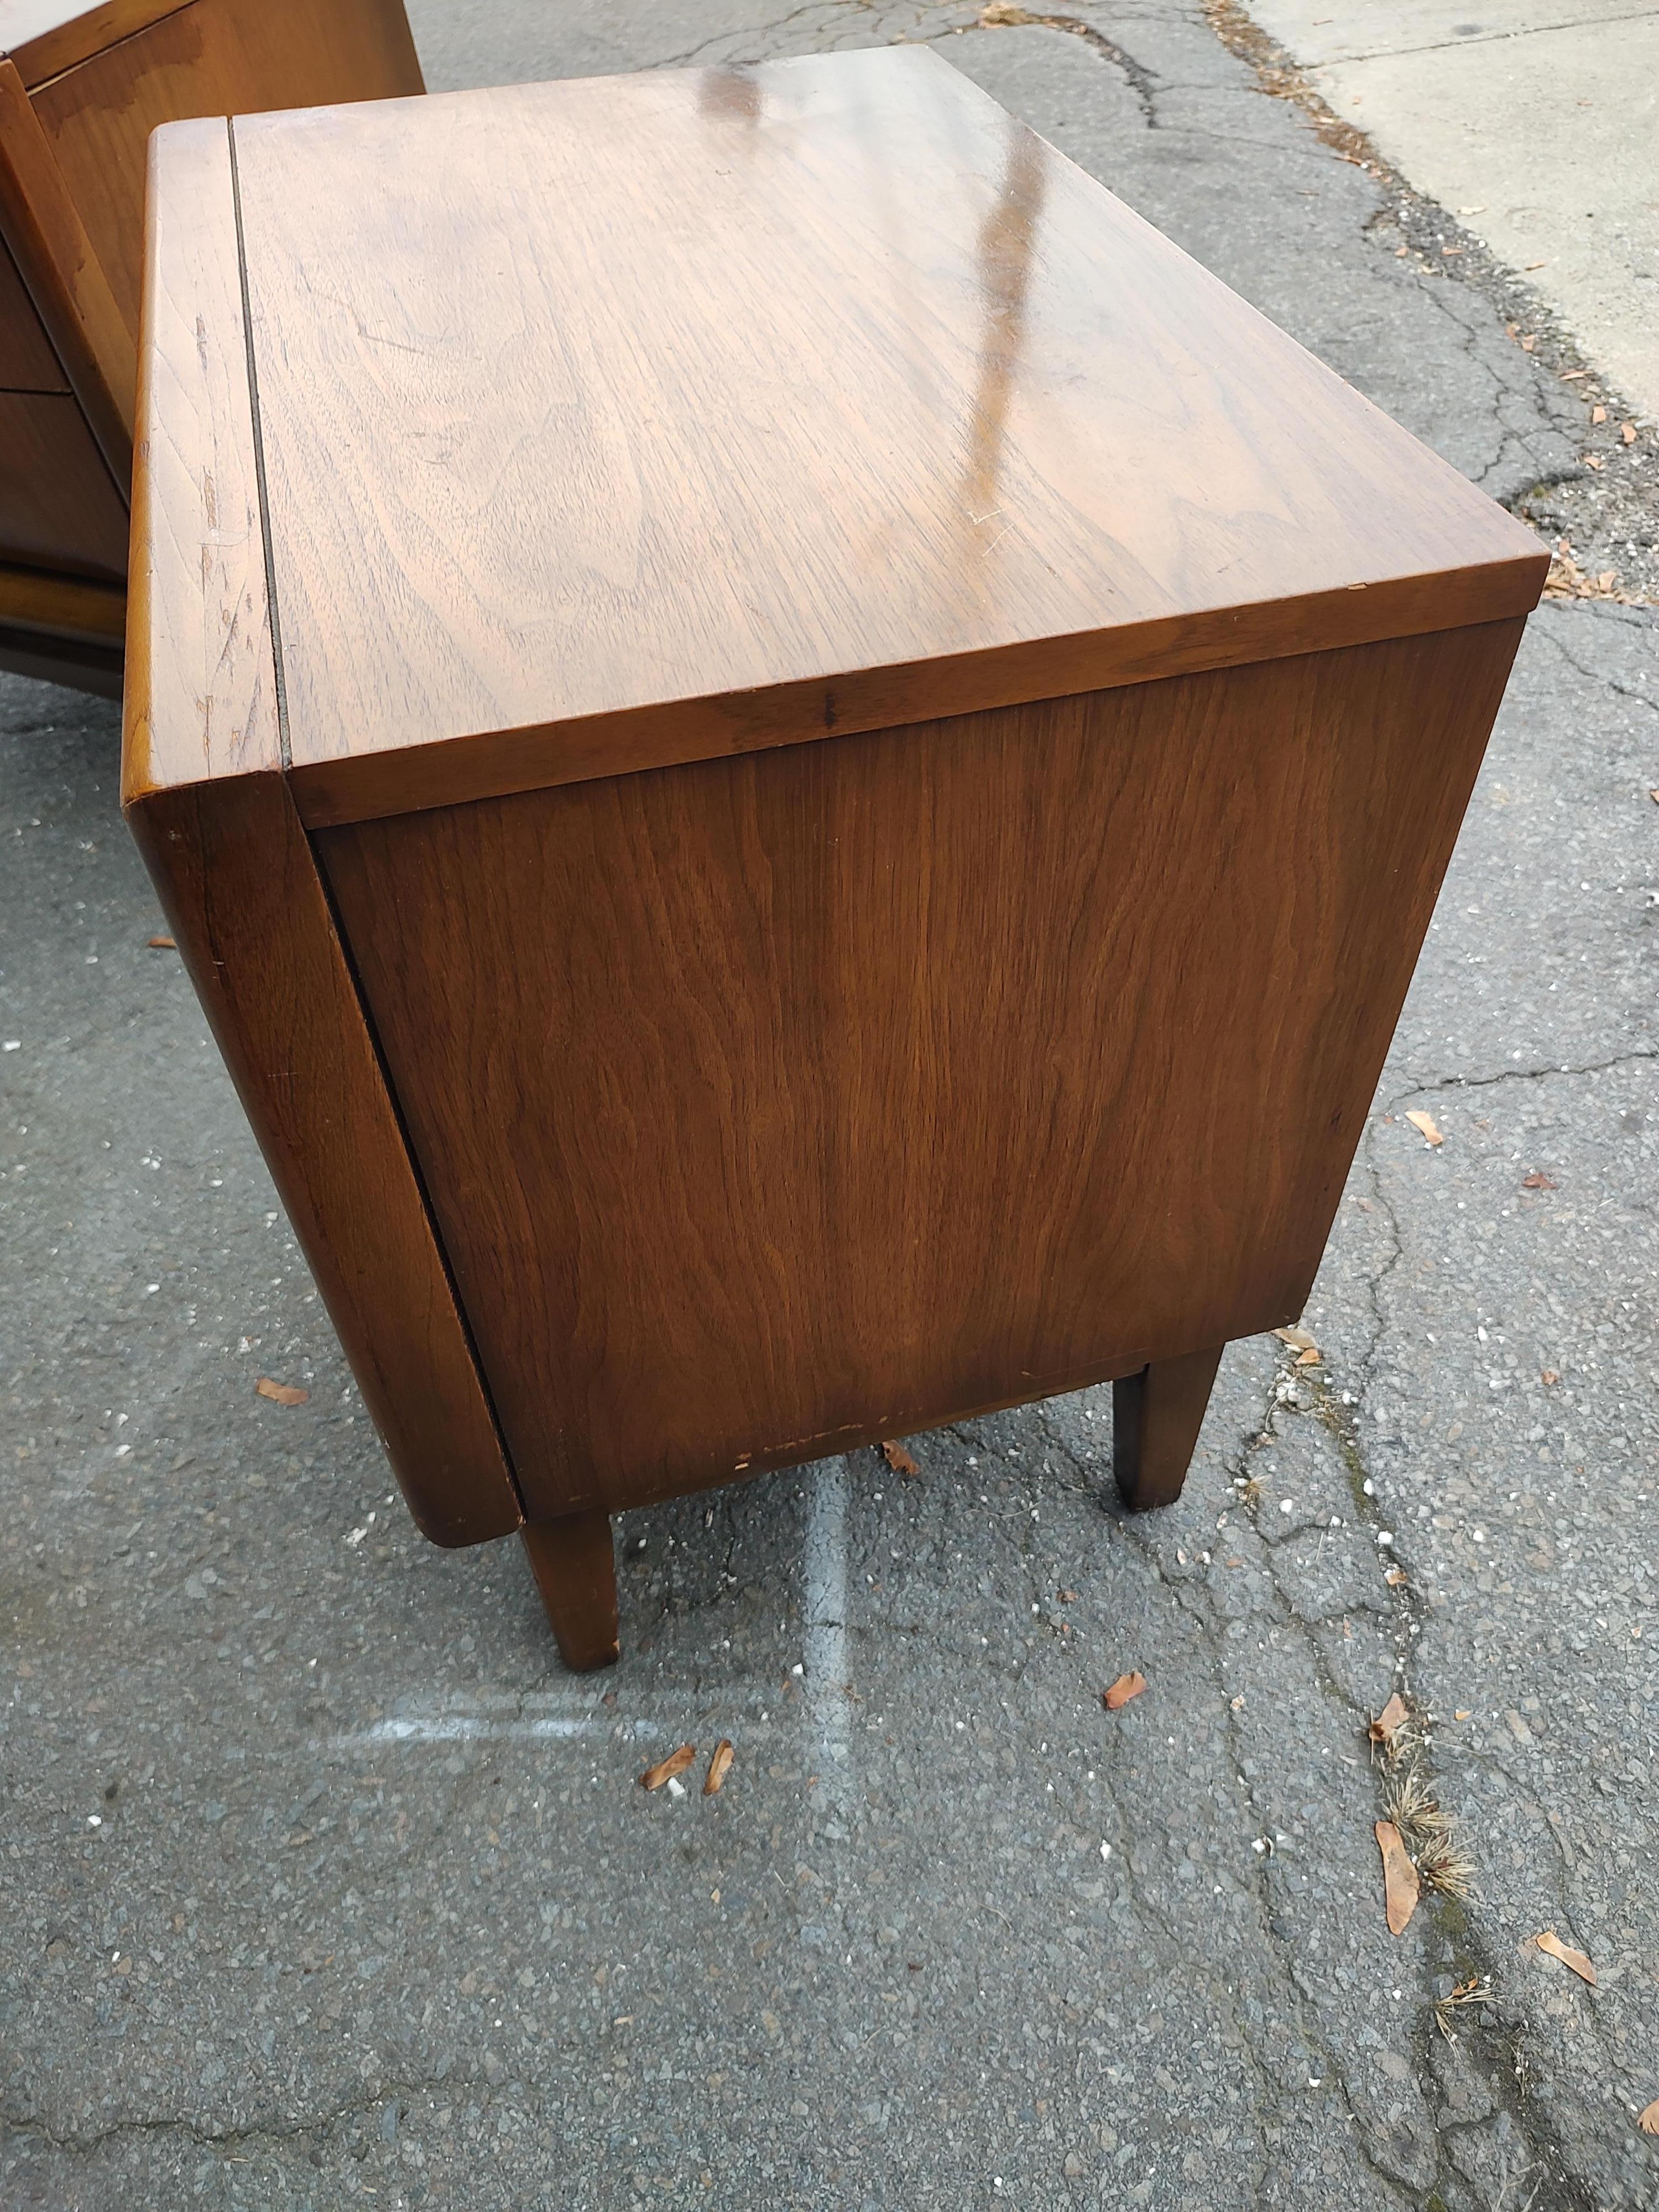 Pair Mid Century Modern Diamond Faced Walnut Night Stands by United Furniture   In Good Condition For Sale In Port Jervis, NY